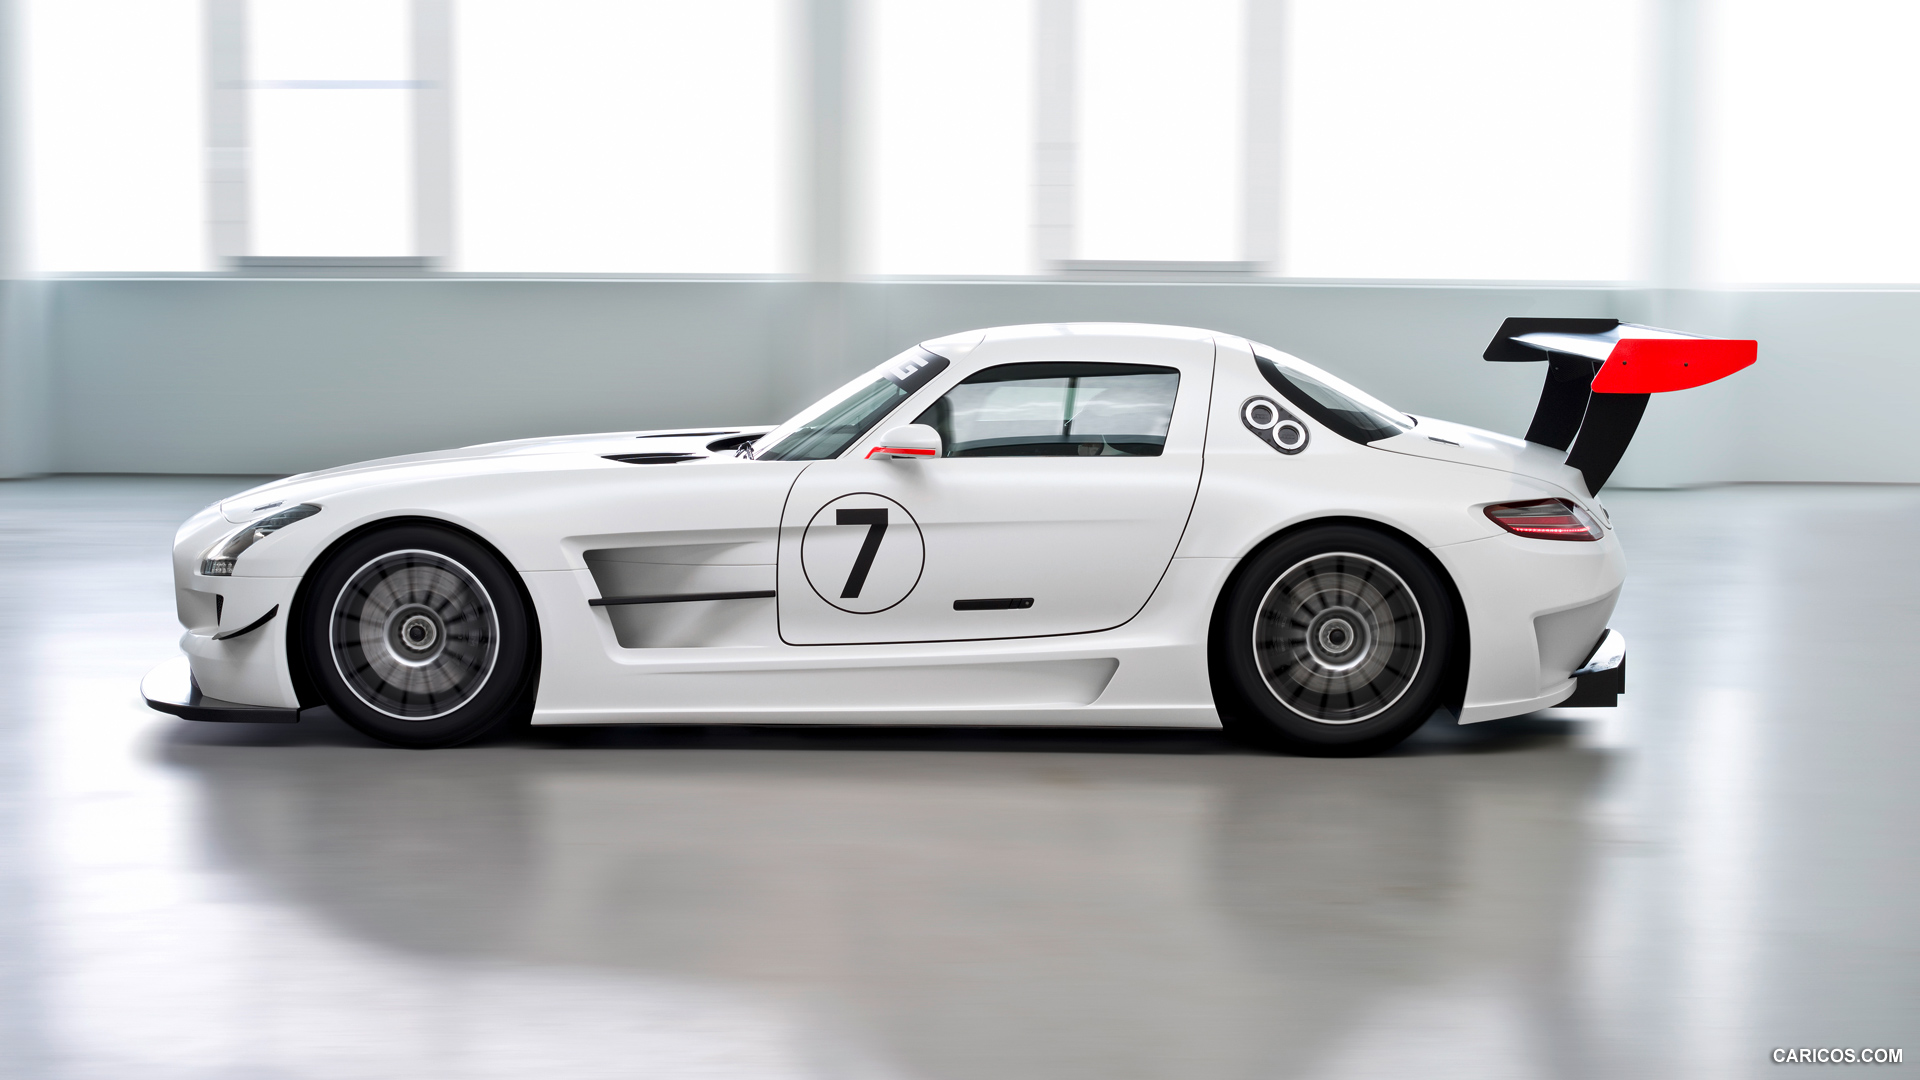 Mercedes-Benz SLS AMG GT3  - Side View Photo, #21 of 30